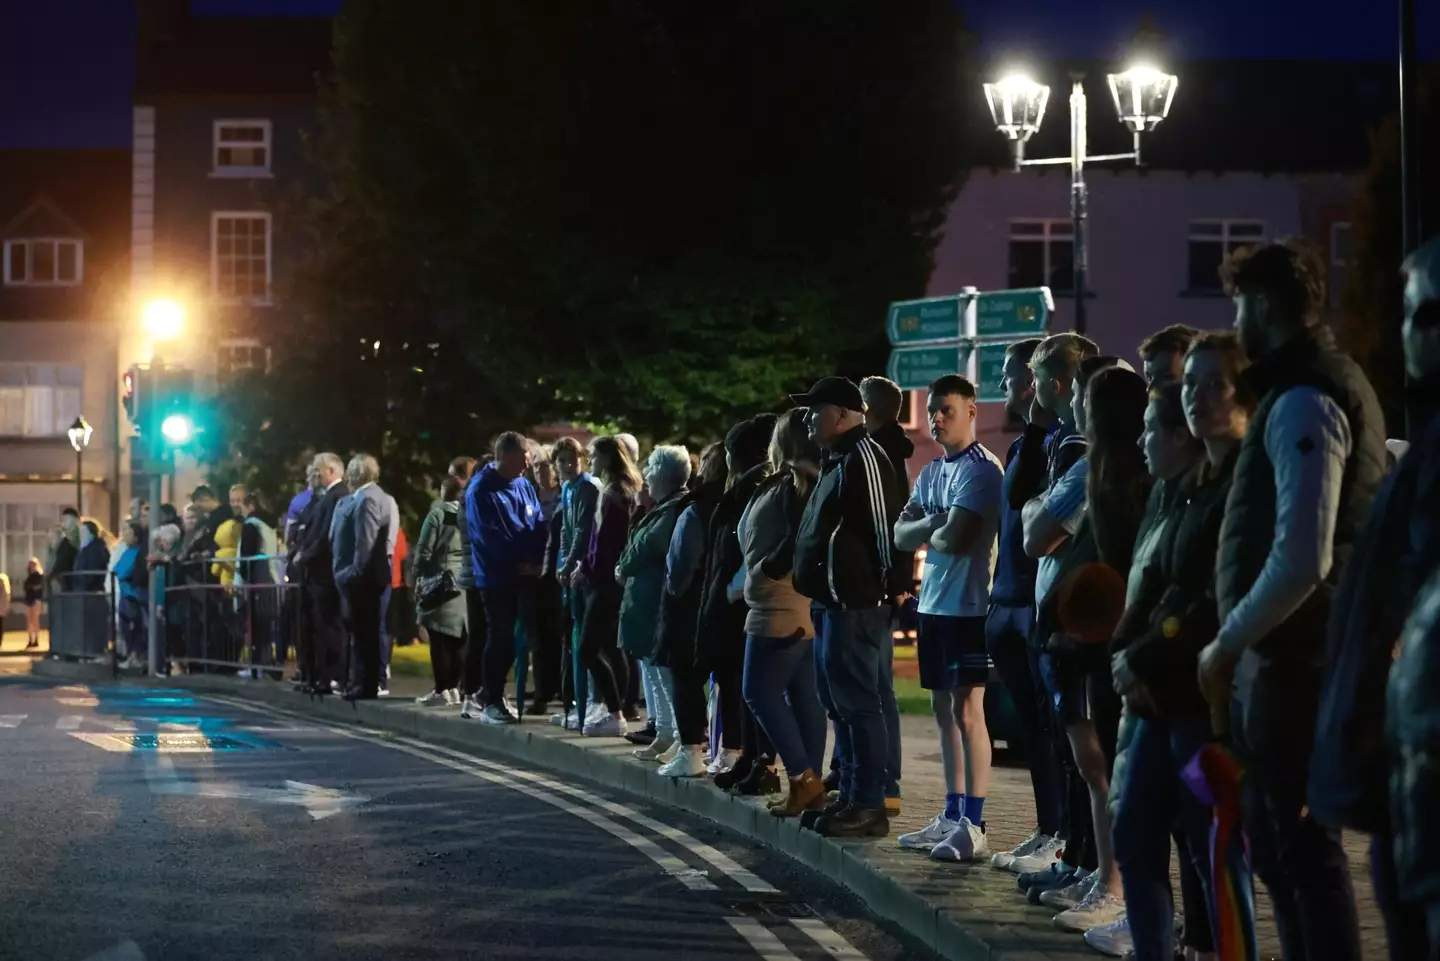 Hundreds of people from the local community stood on Monaghan Street in a show of support following the fatal car crash.